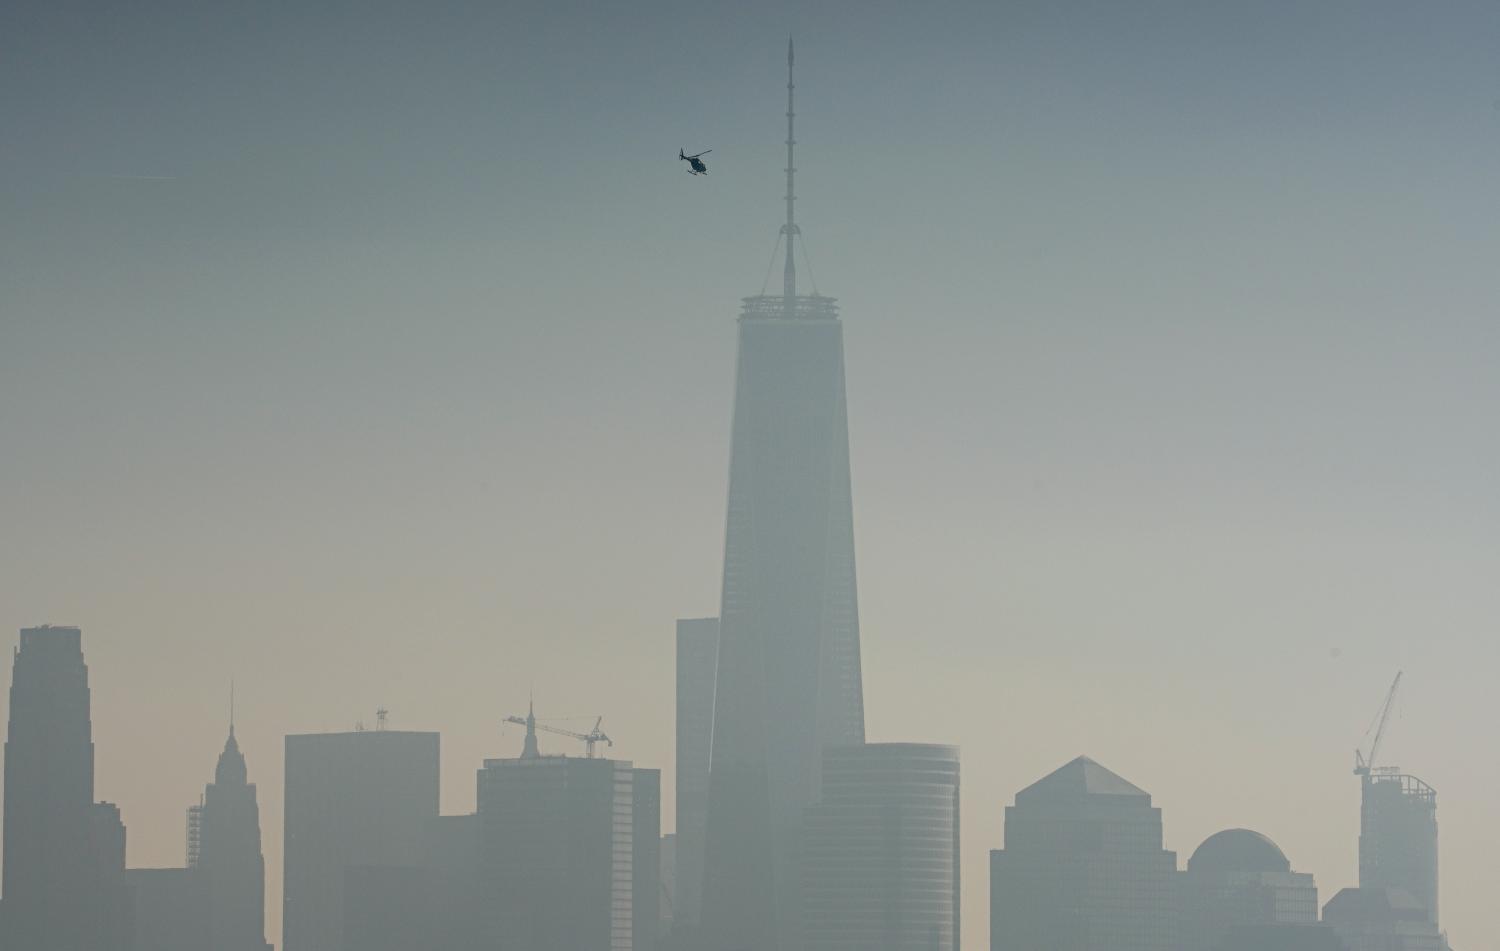 A helicopter flies over the Hudson River with One World Trade Center and Lower Manhattan in the background, on a hazy day in New York City, December 6, 2015. REUTERS/Rickey Rogers      TPX IMAGES OF THE DAY         - GF10000256860